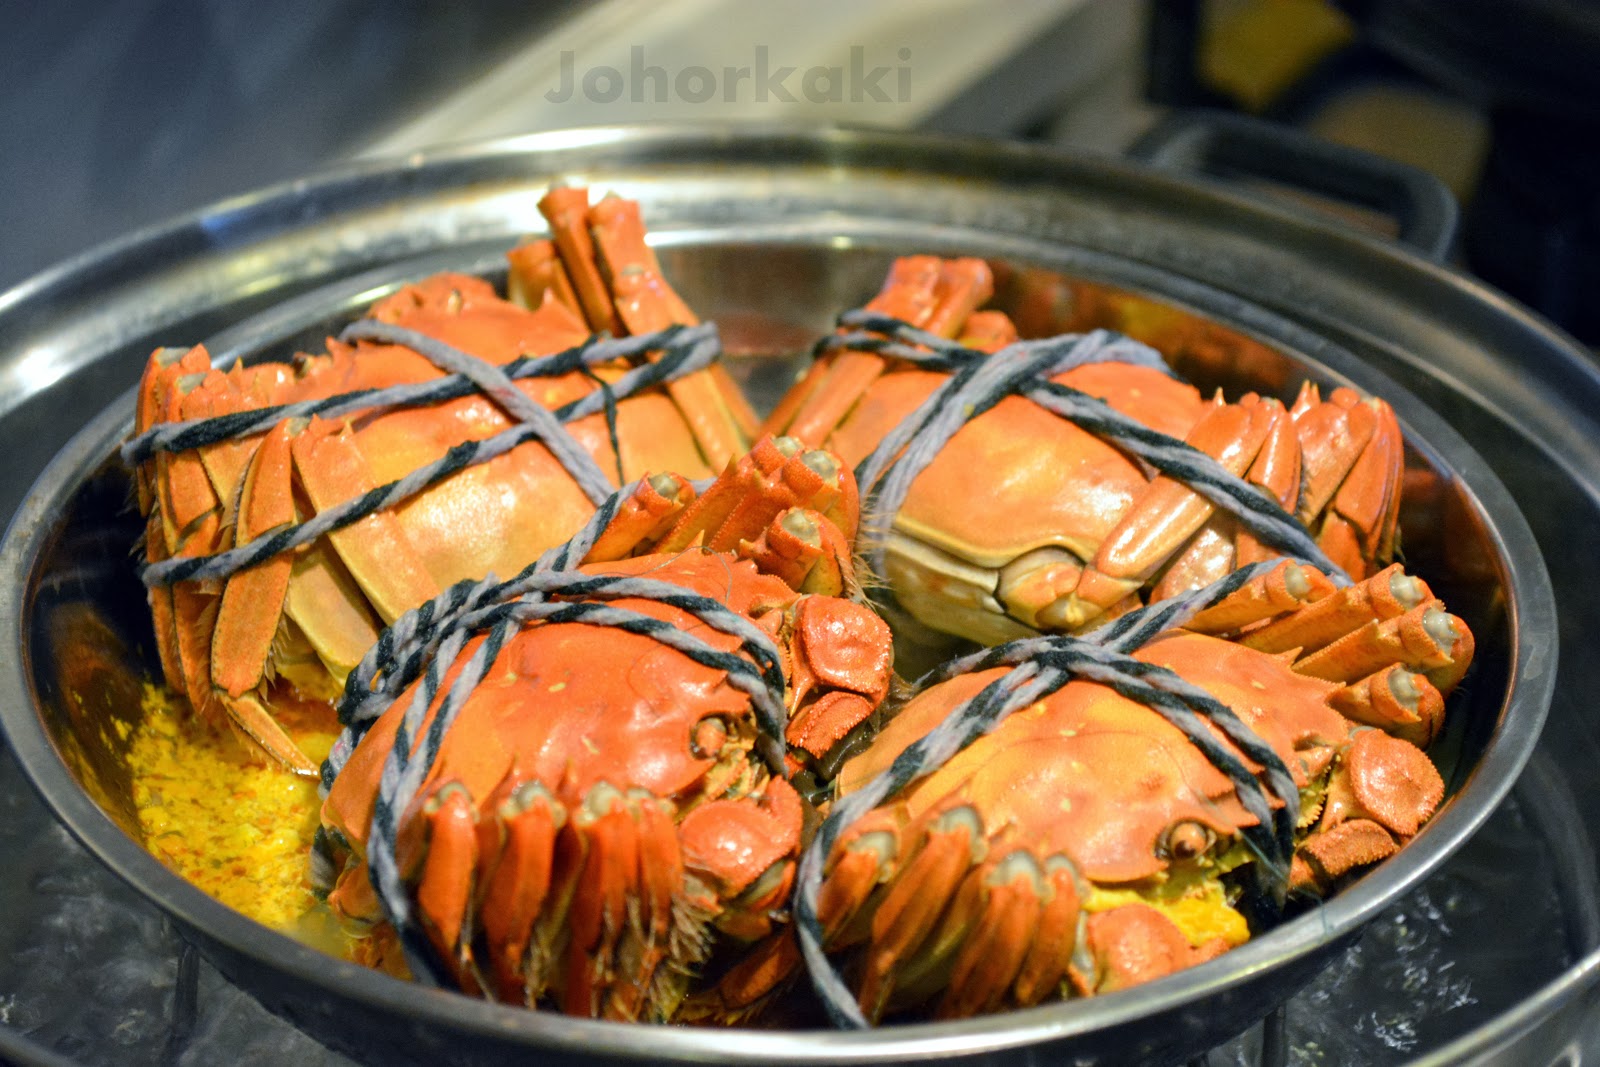 Shanghai Hairy Crabs 大閘蟹 How Not To Be Sold A Fake Yangcheng 陽澄湖 Hairy Crab Johor Kaki